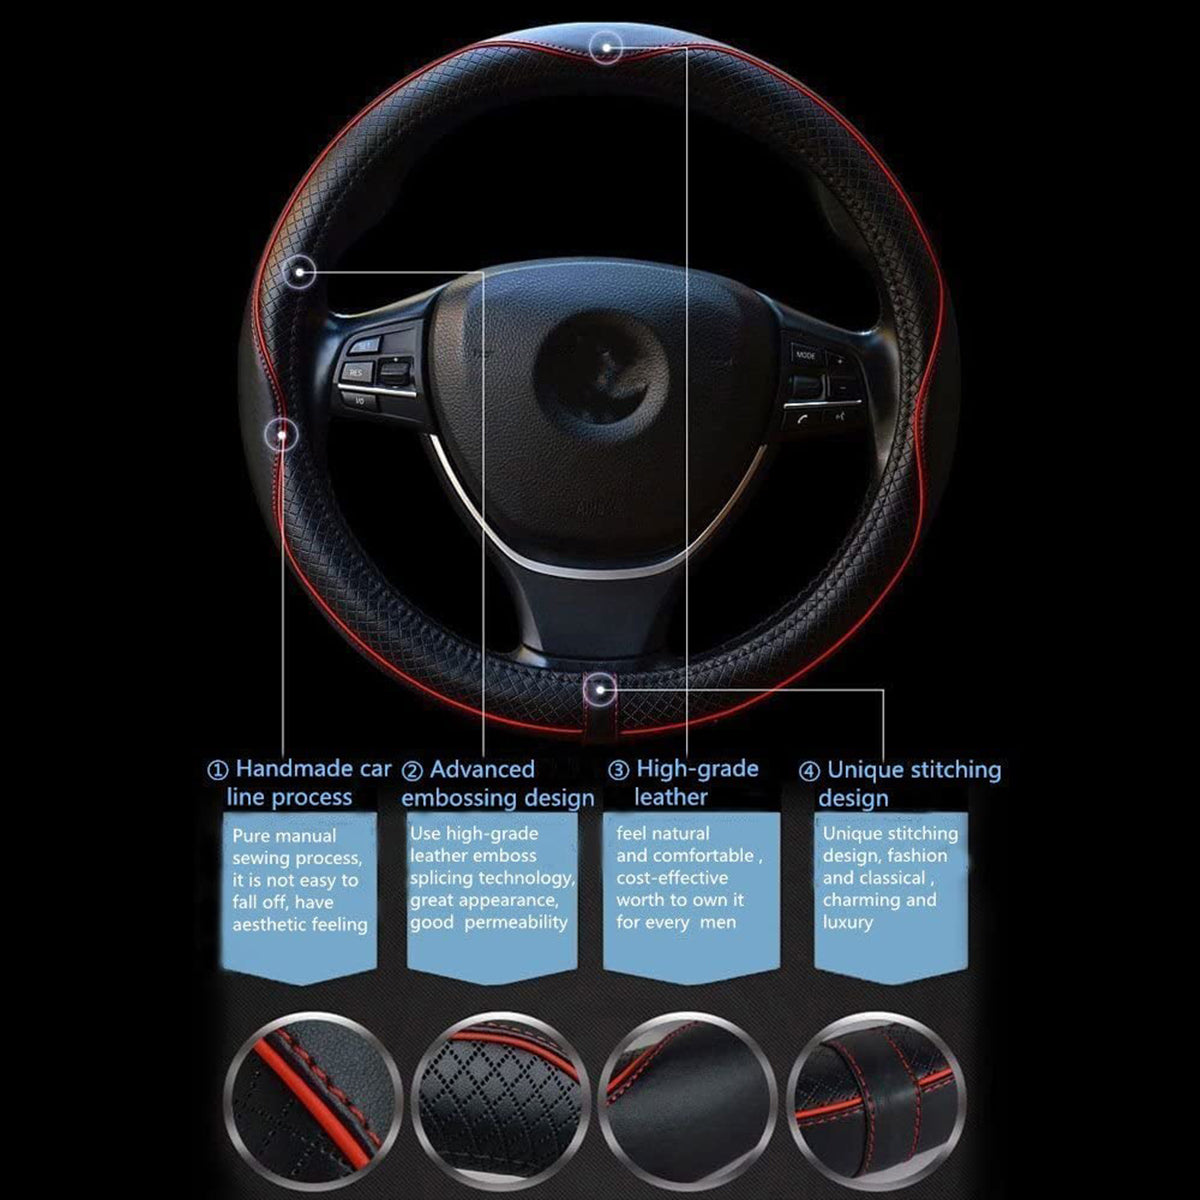 Car Steering Wheel Cover, Custom For Your Cars, Anti-Slip, Safety, Soft, Breathable, Heavy Duty, Thick, Full Surround, Sports Style, Car Accessories MY18990 - Delicate Leather